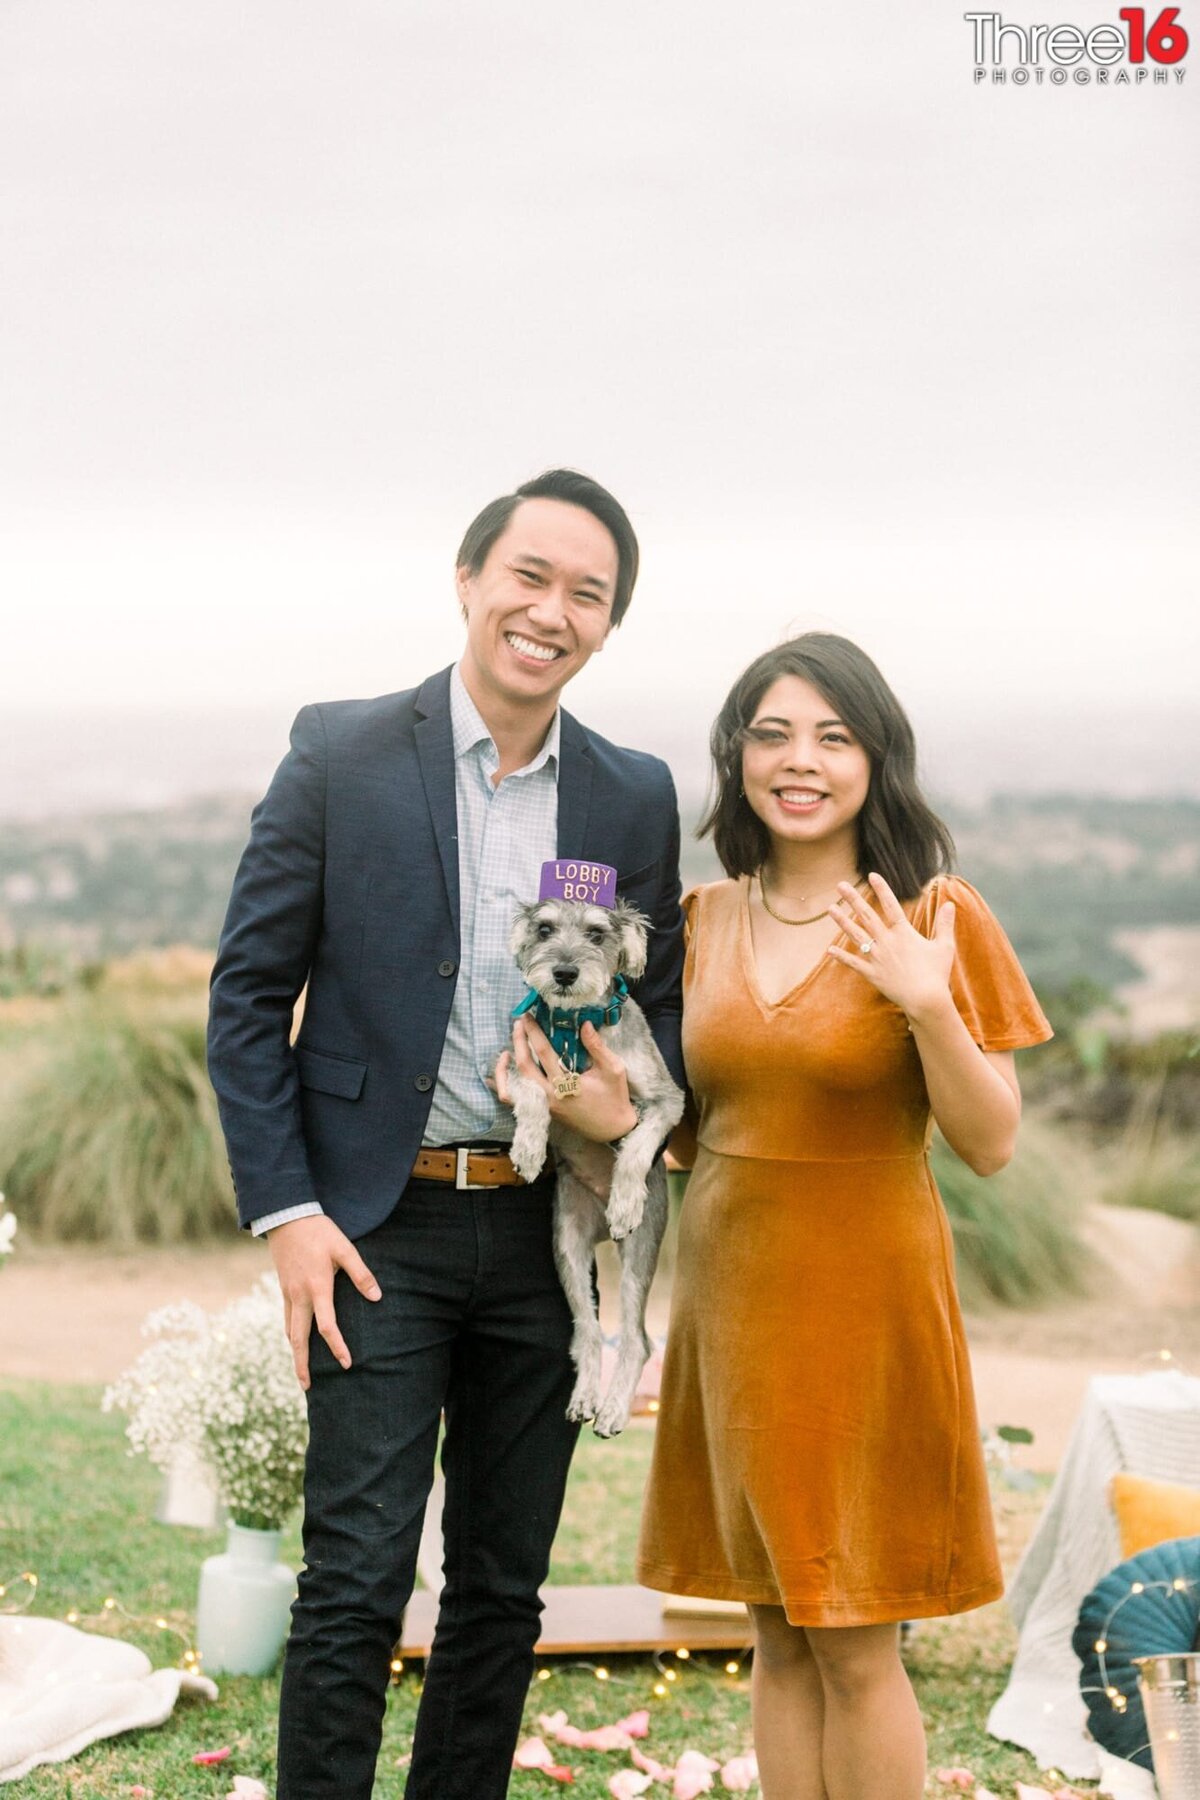 New Bride to be shows off her ring after accepting a marriage proposal while she poses with her fiance and dog